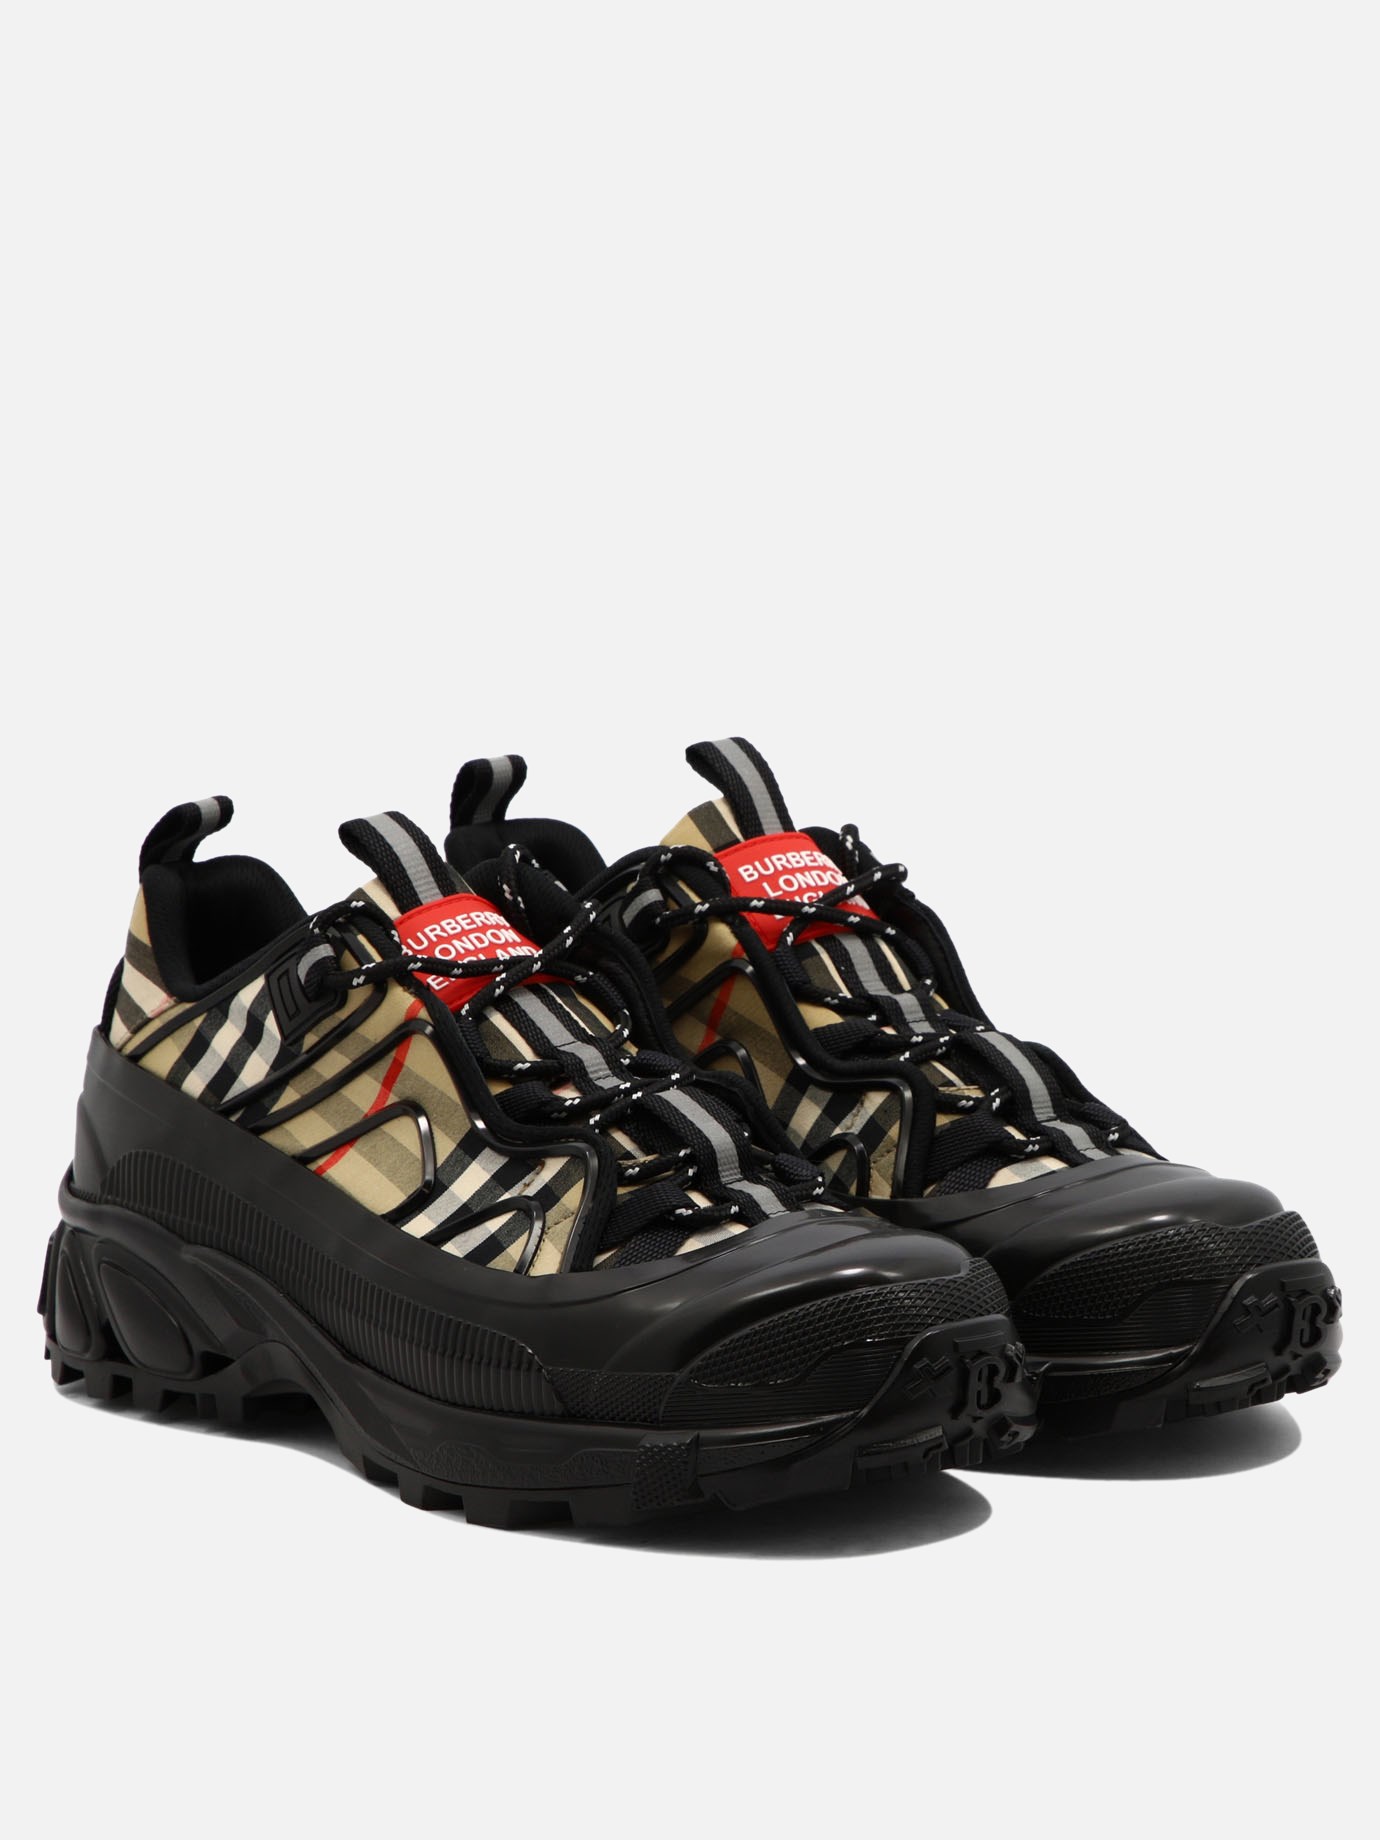  Arthur  sneakers by Burberry